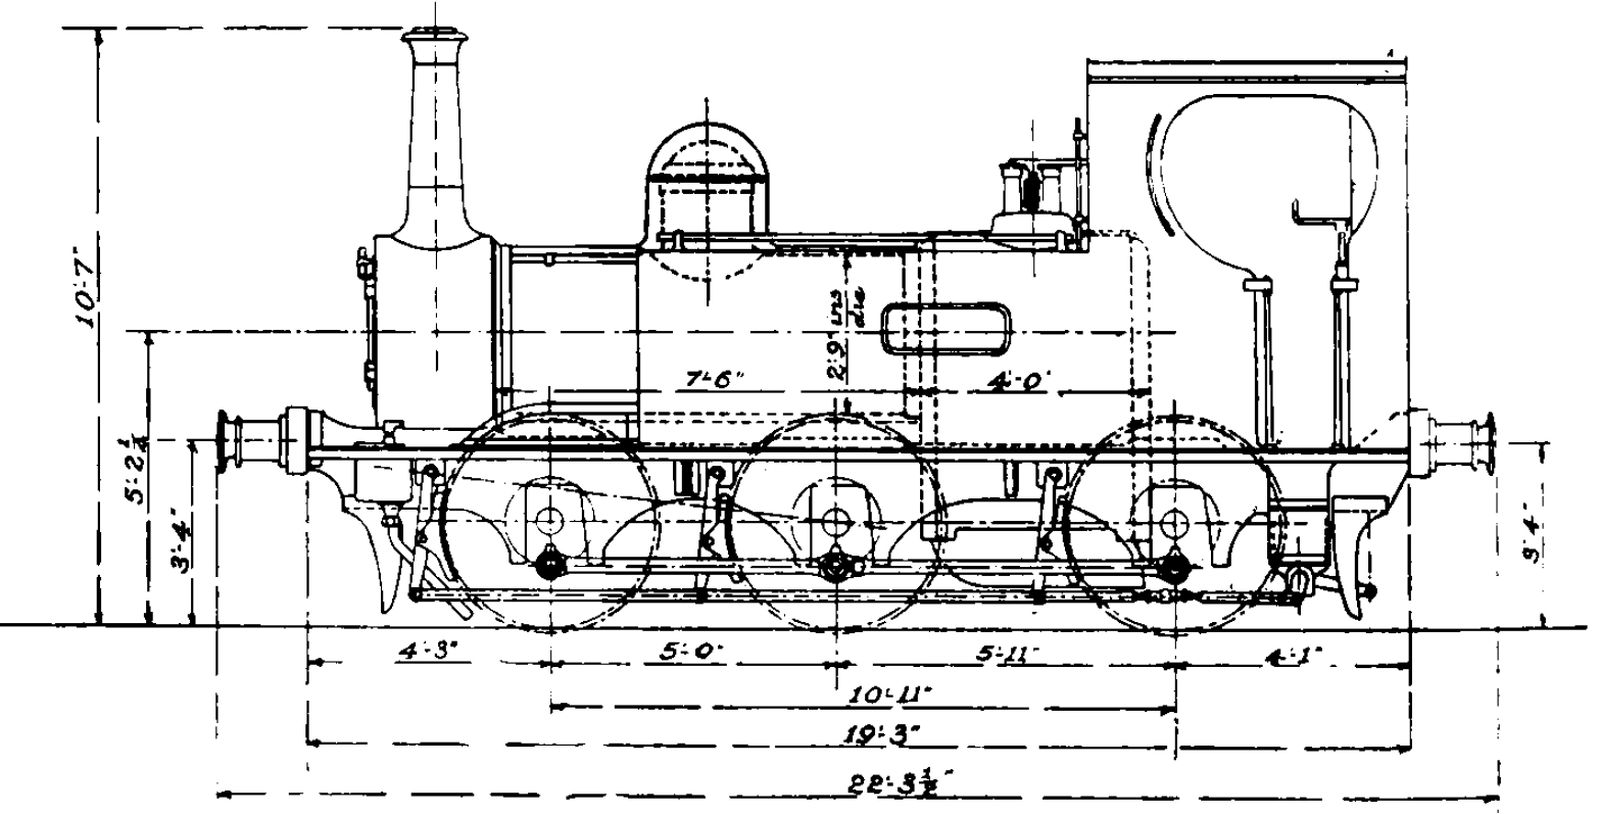 schematic drawing after the rebuild